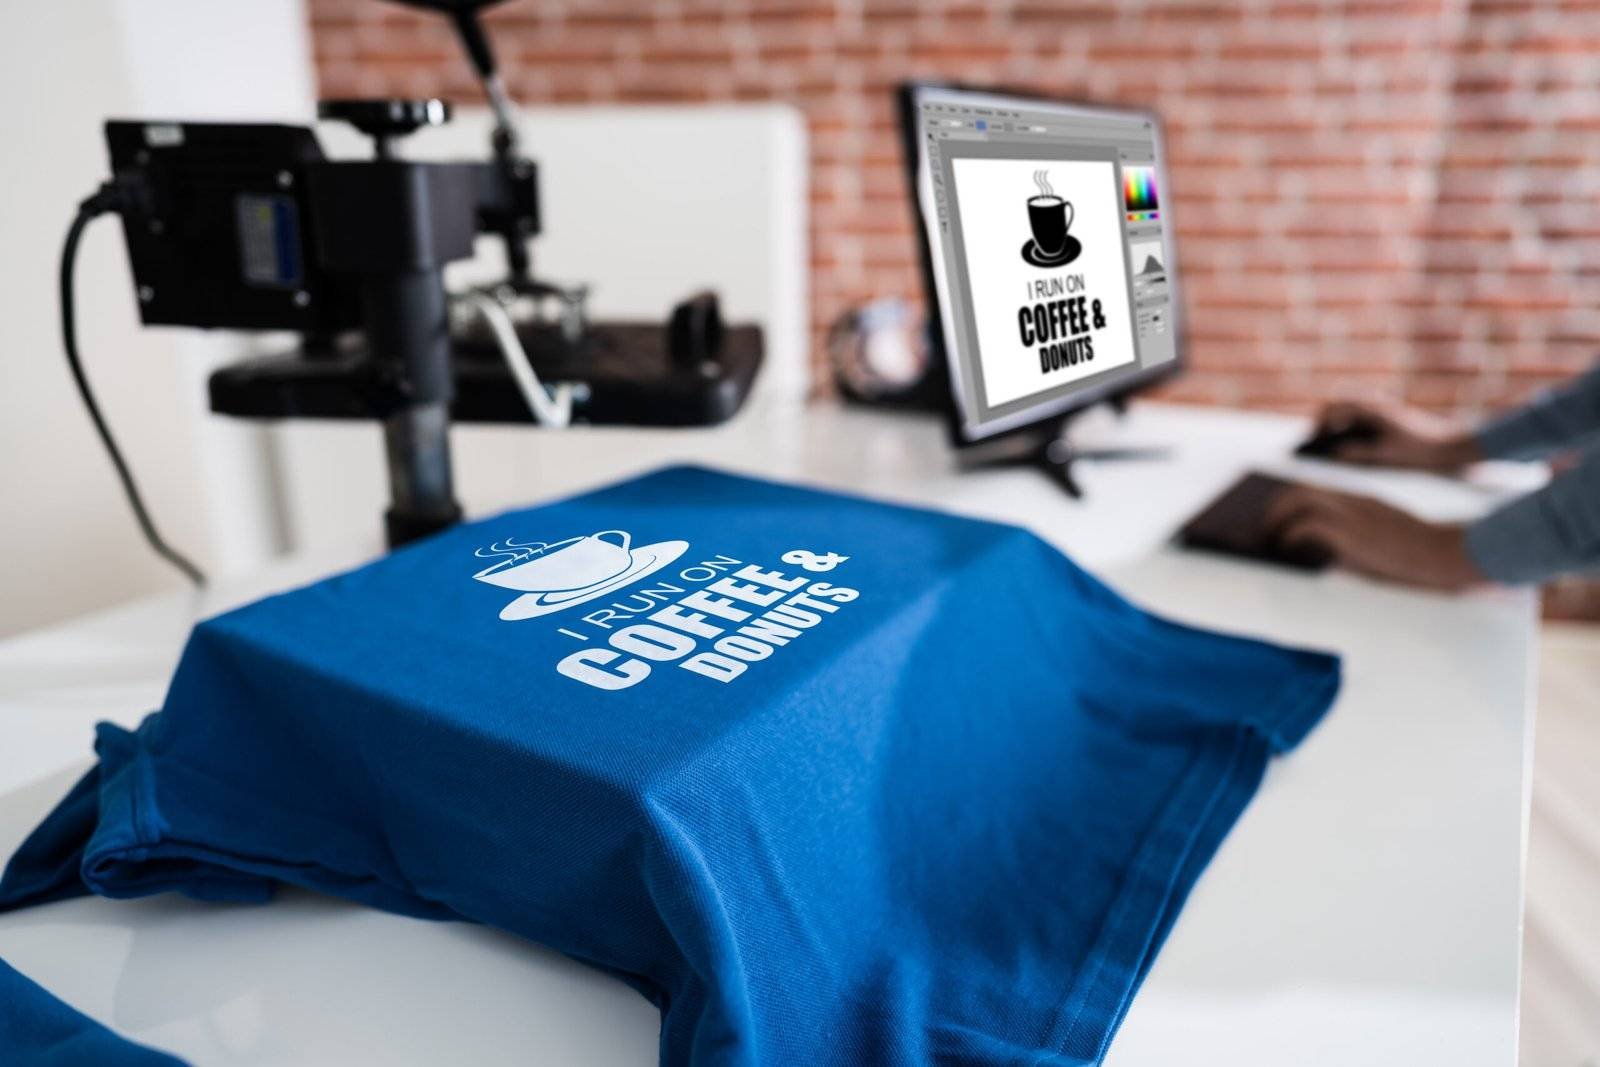 Coffee and Donuts T-shirt on a press